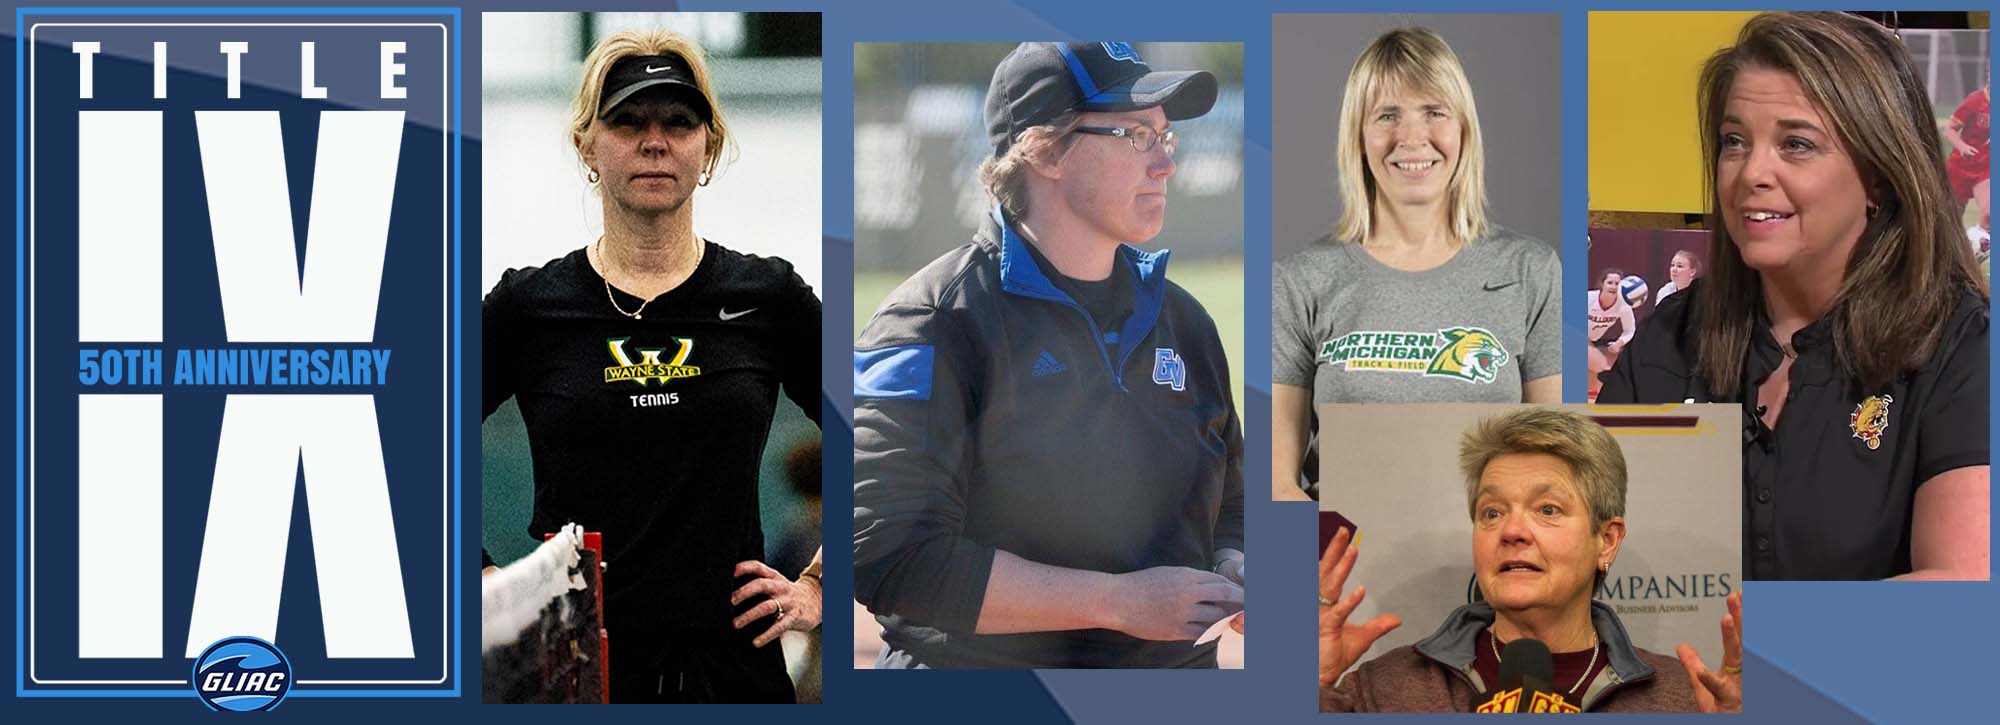 As women's athletics evolves, successful veteran coaches focus on athletes' personal growth